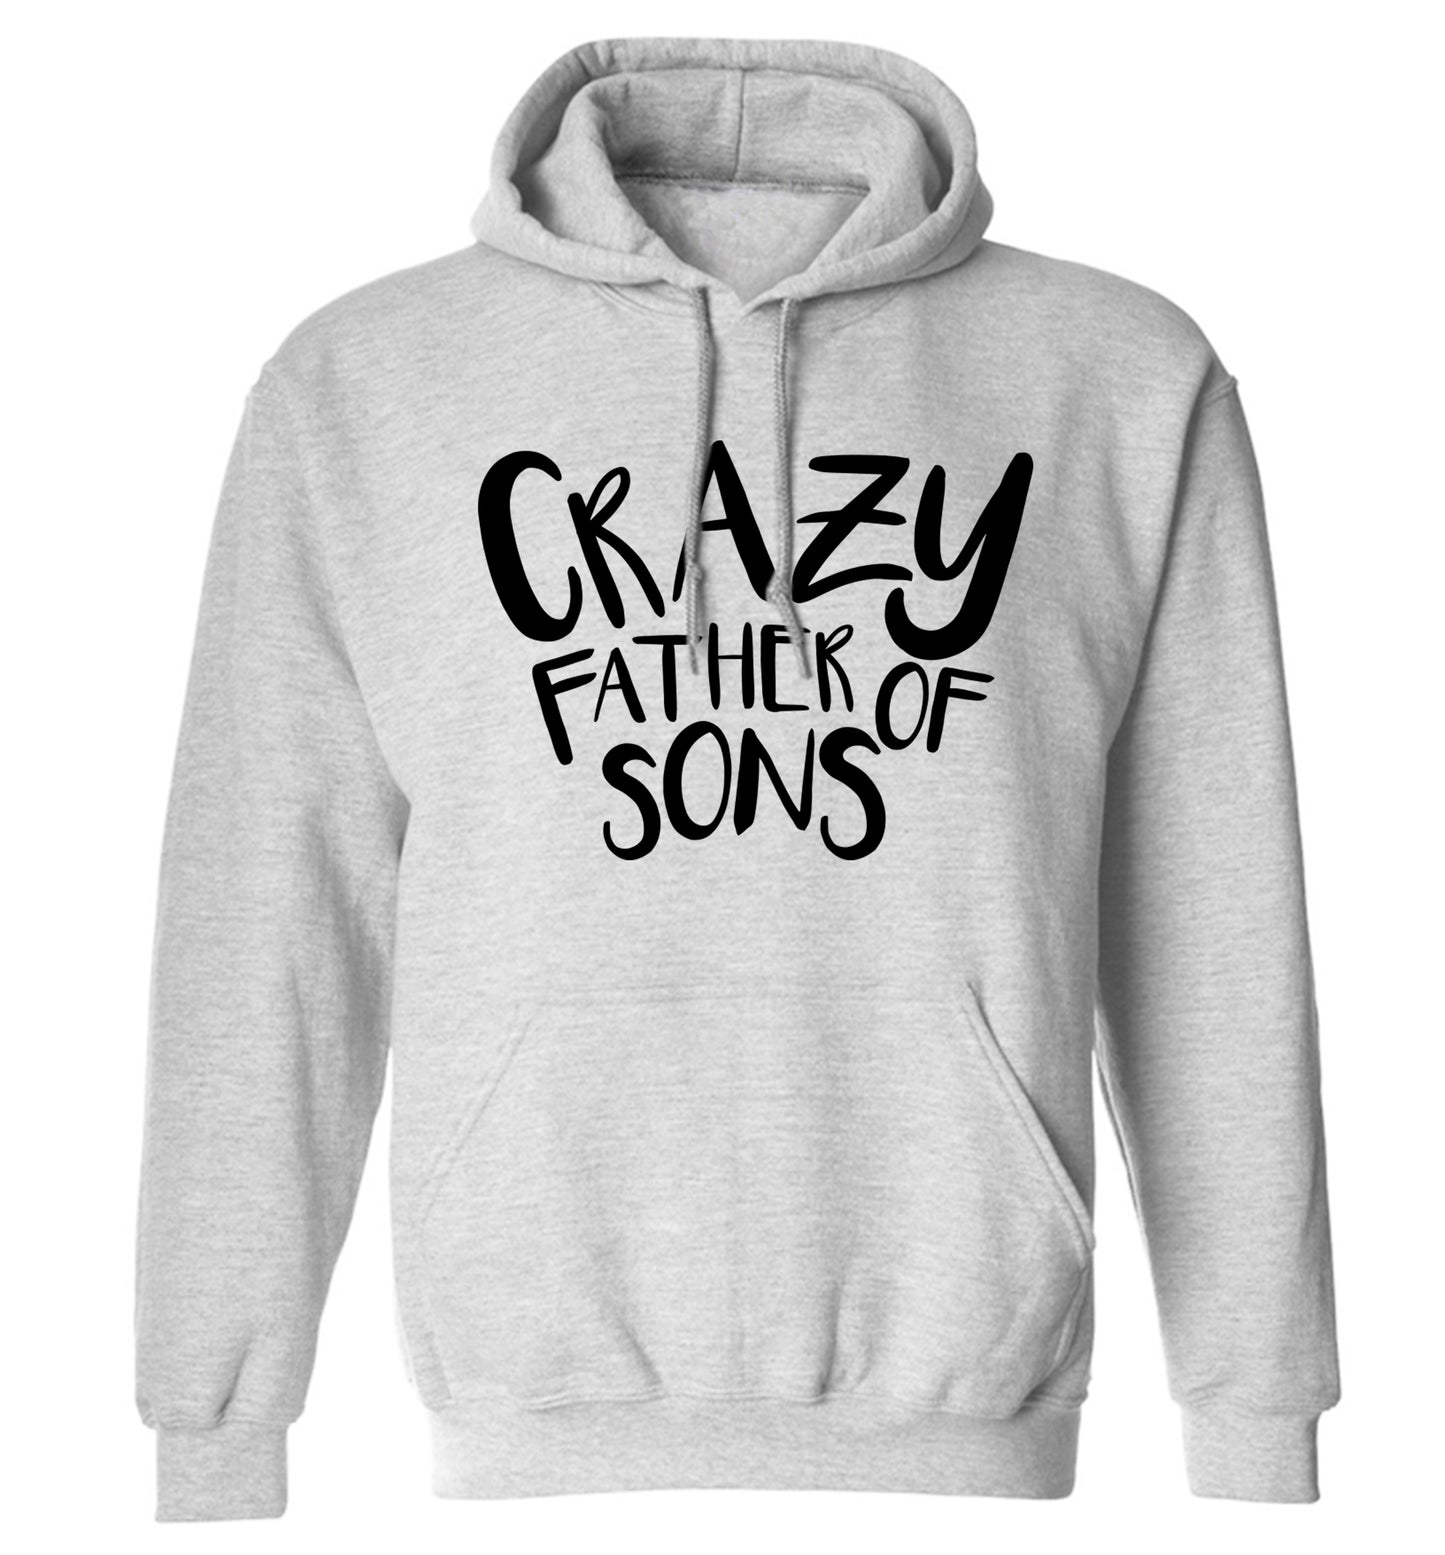 Crazy father of sons adults unisex grey hoodie 2XL